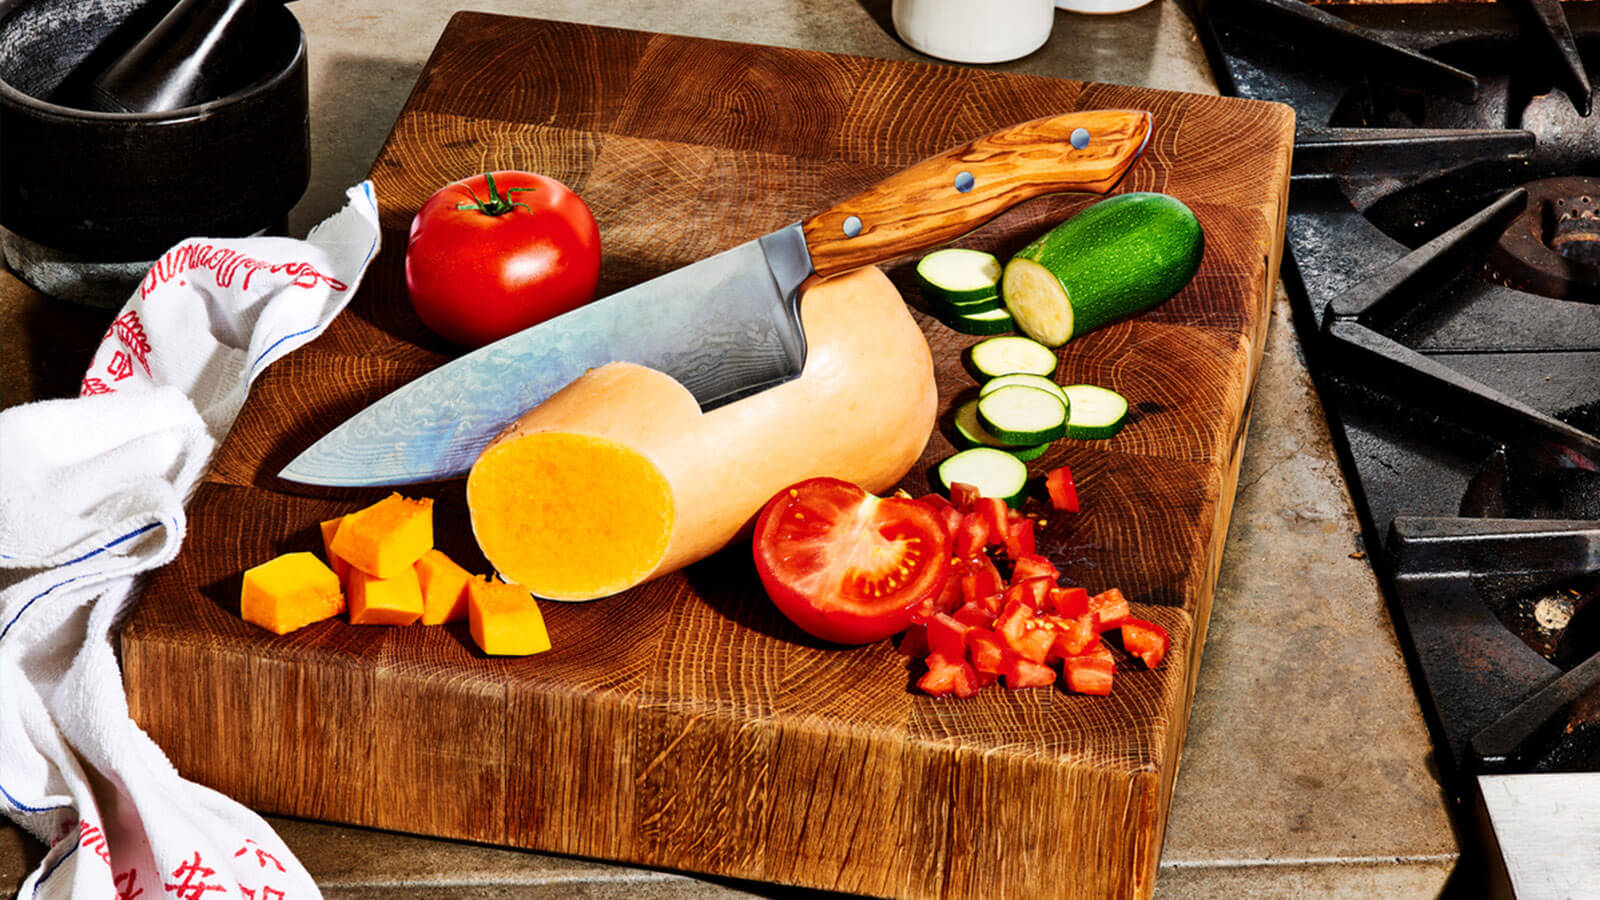 Image of vegetables and knife on chopping board